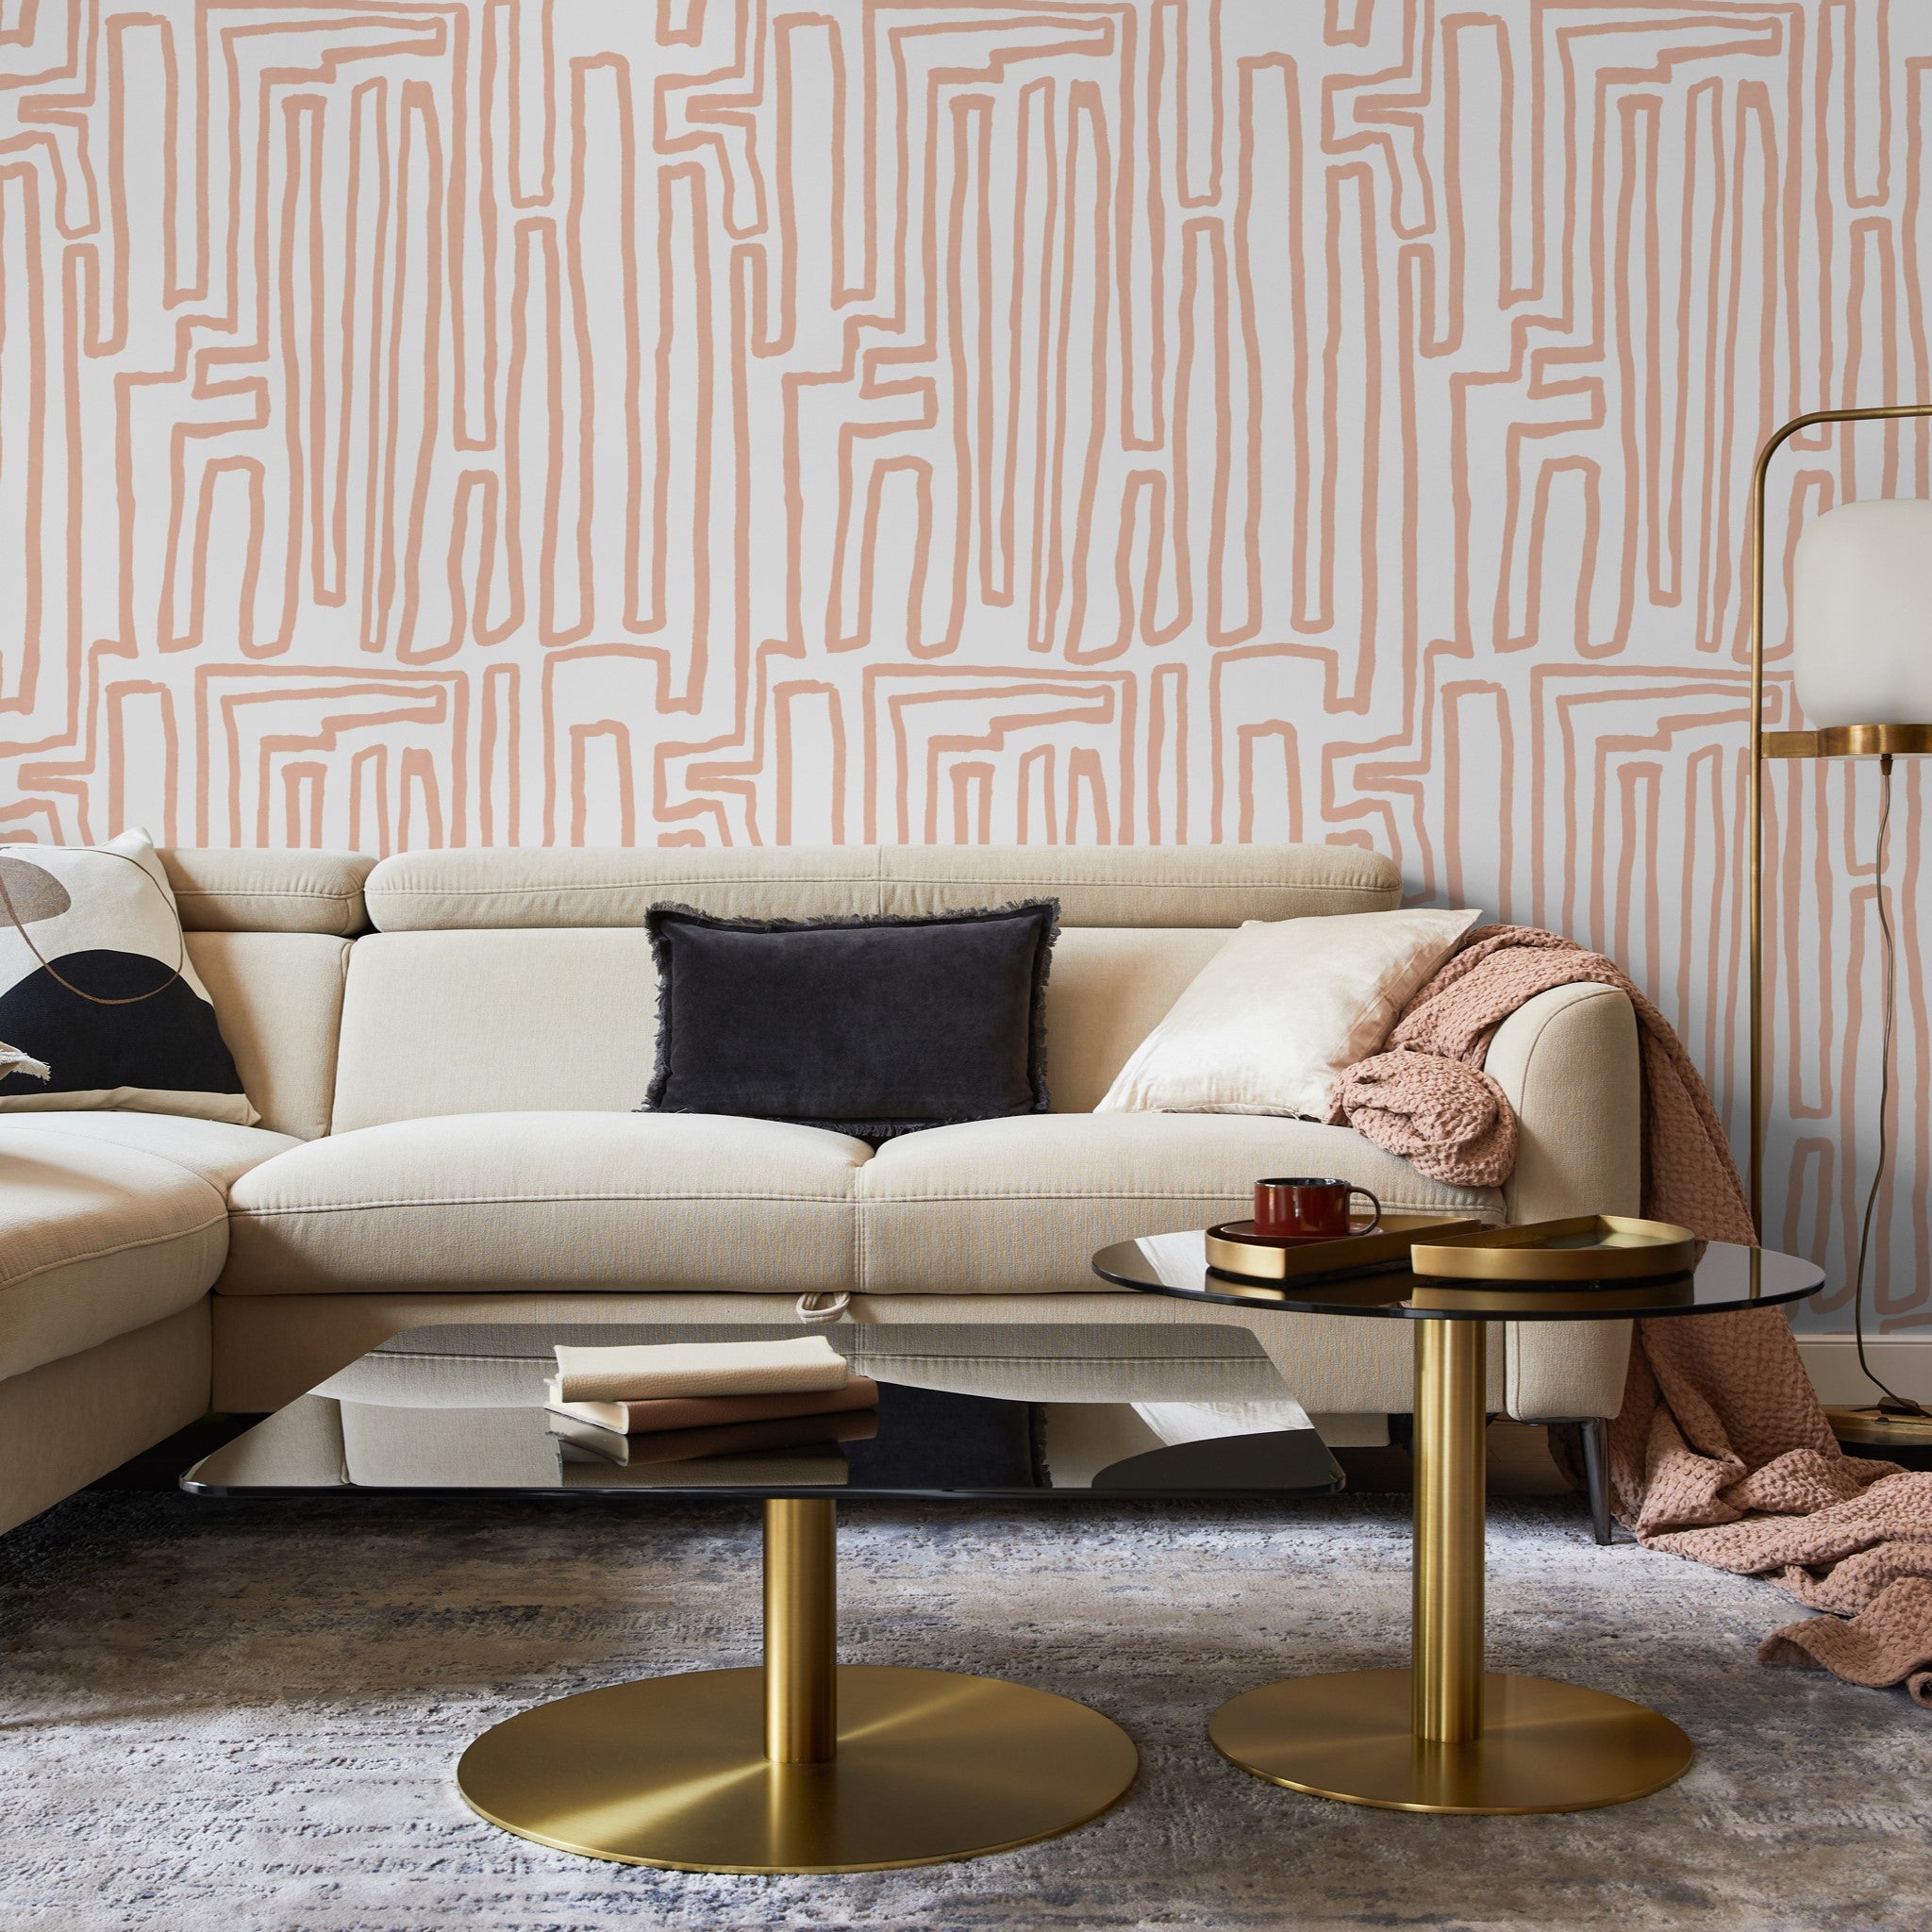 "IDK Wallpaper by Wall Blush in a stylish living room, showcasing the intricate pattern as the main backdrop."